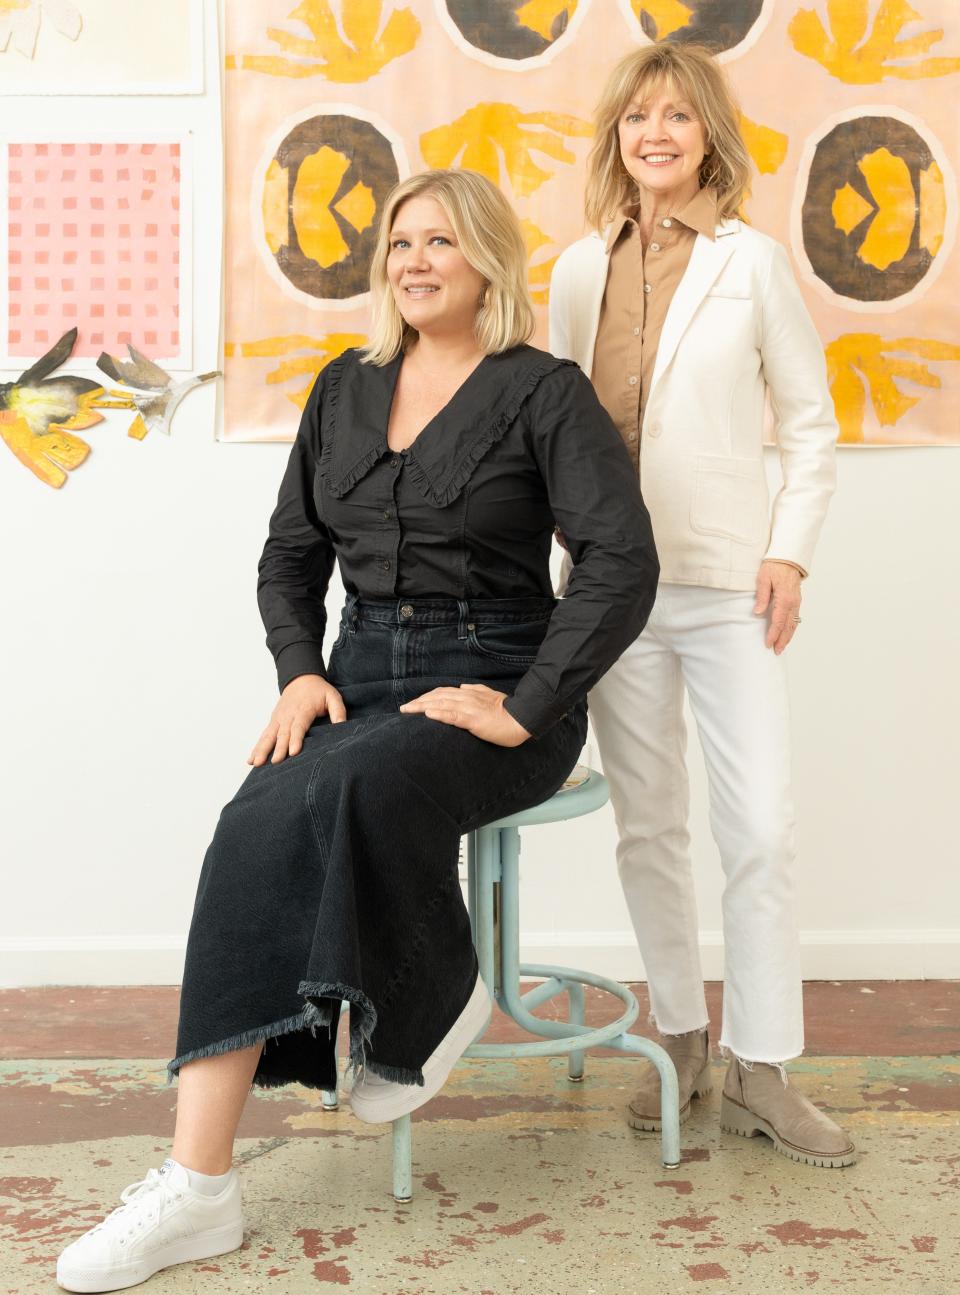 Greenville artists Liz Rundorff Smith and Teresa Roche collaborated to create the Alchemy wallpaper collection.